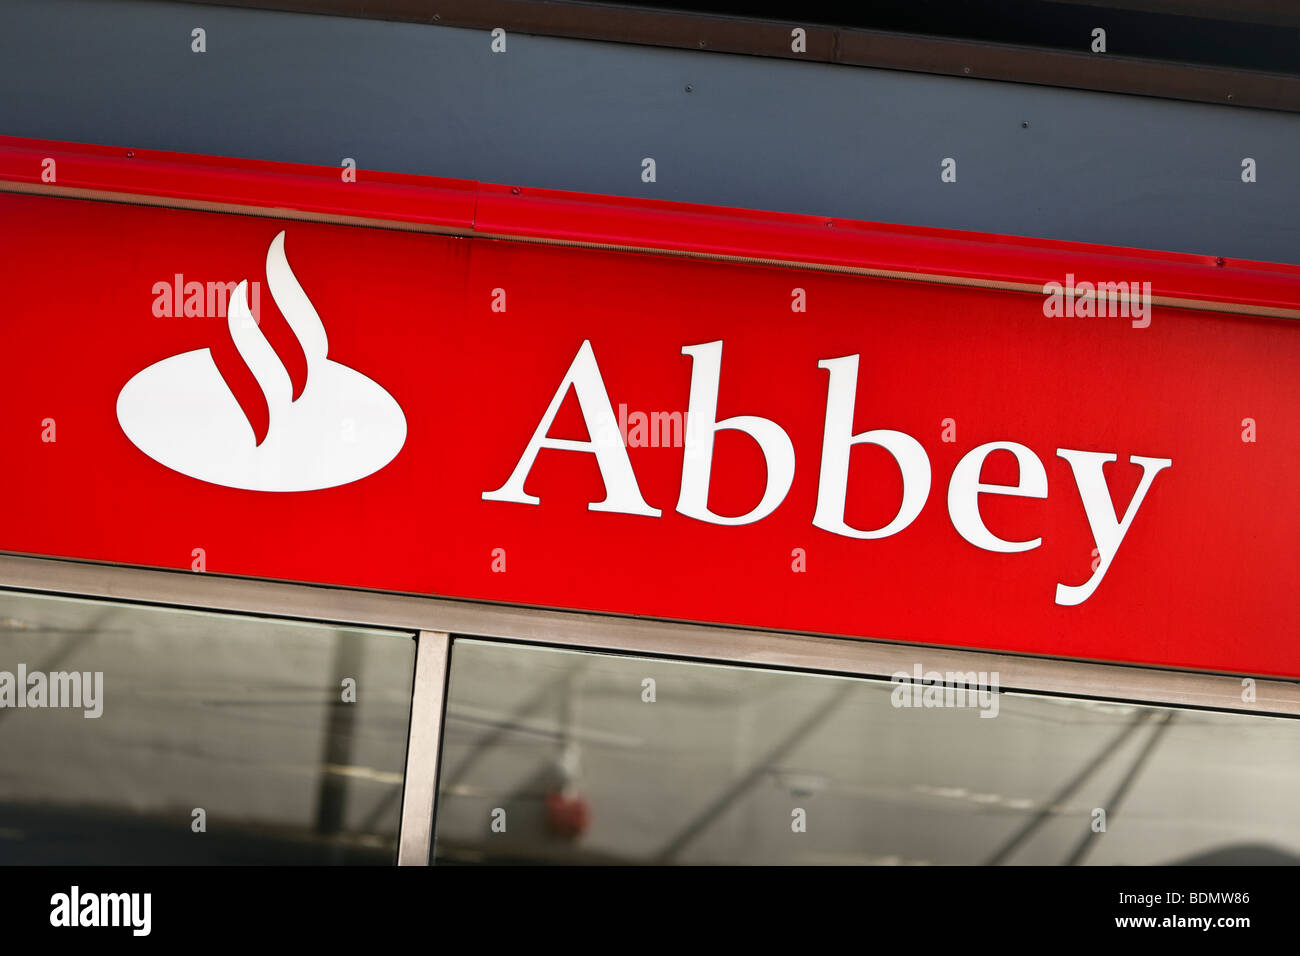 Abbey bank sign Stock Photo